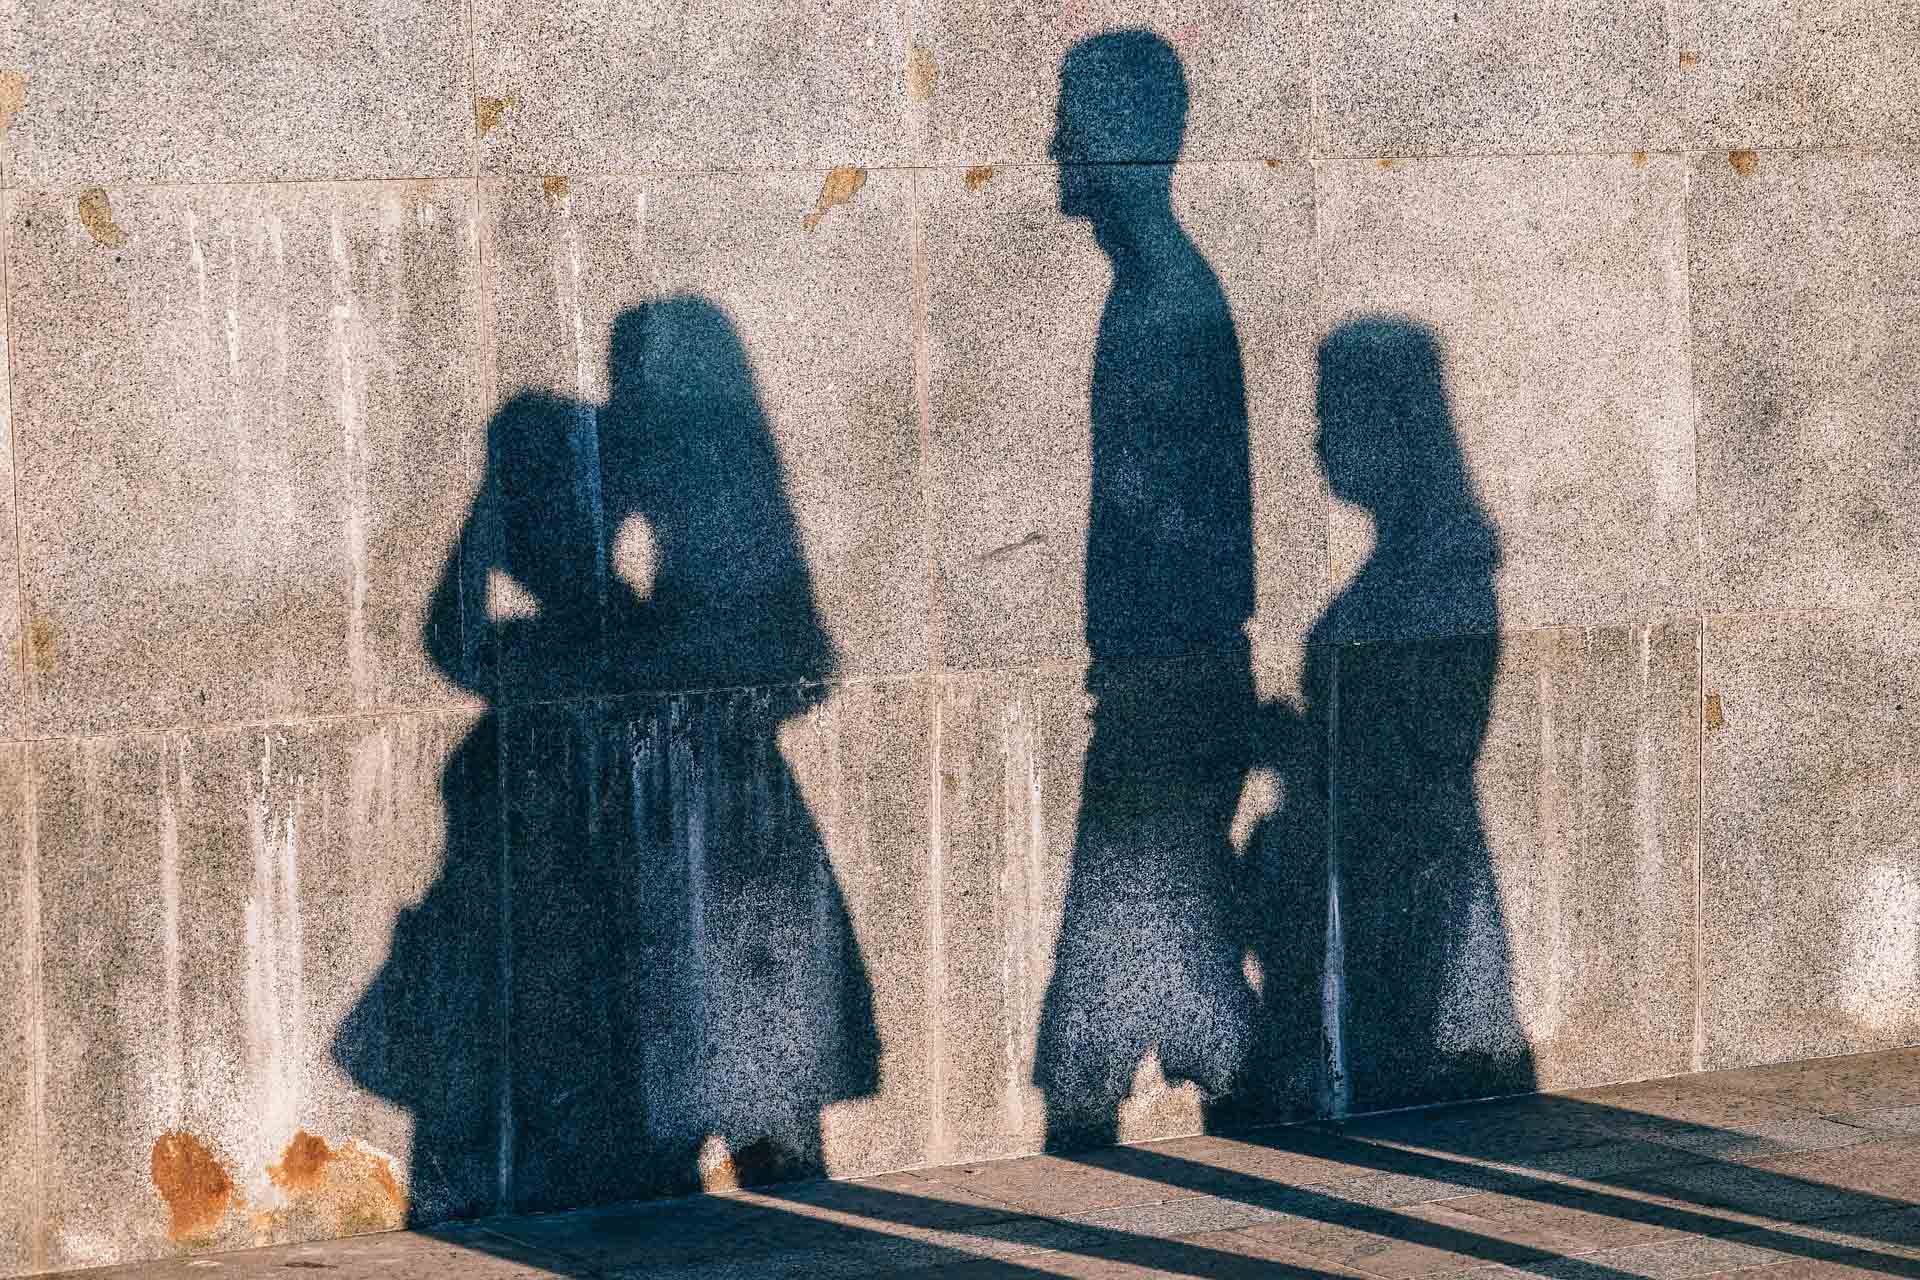 Shadows of four people on a concrete wall.